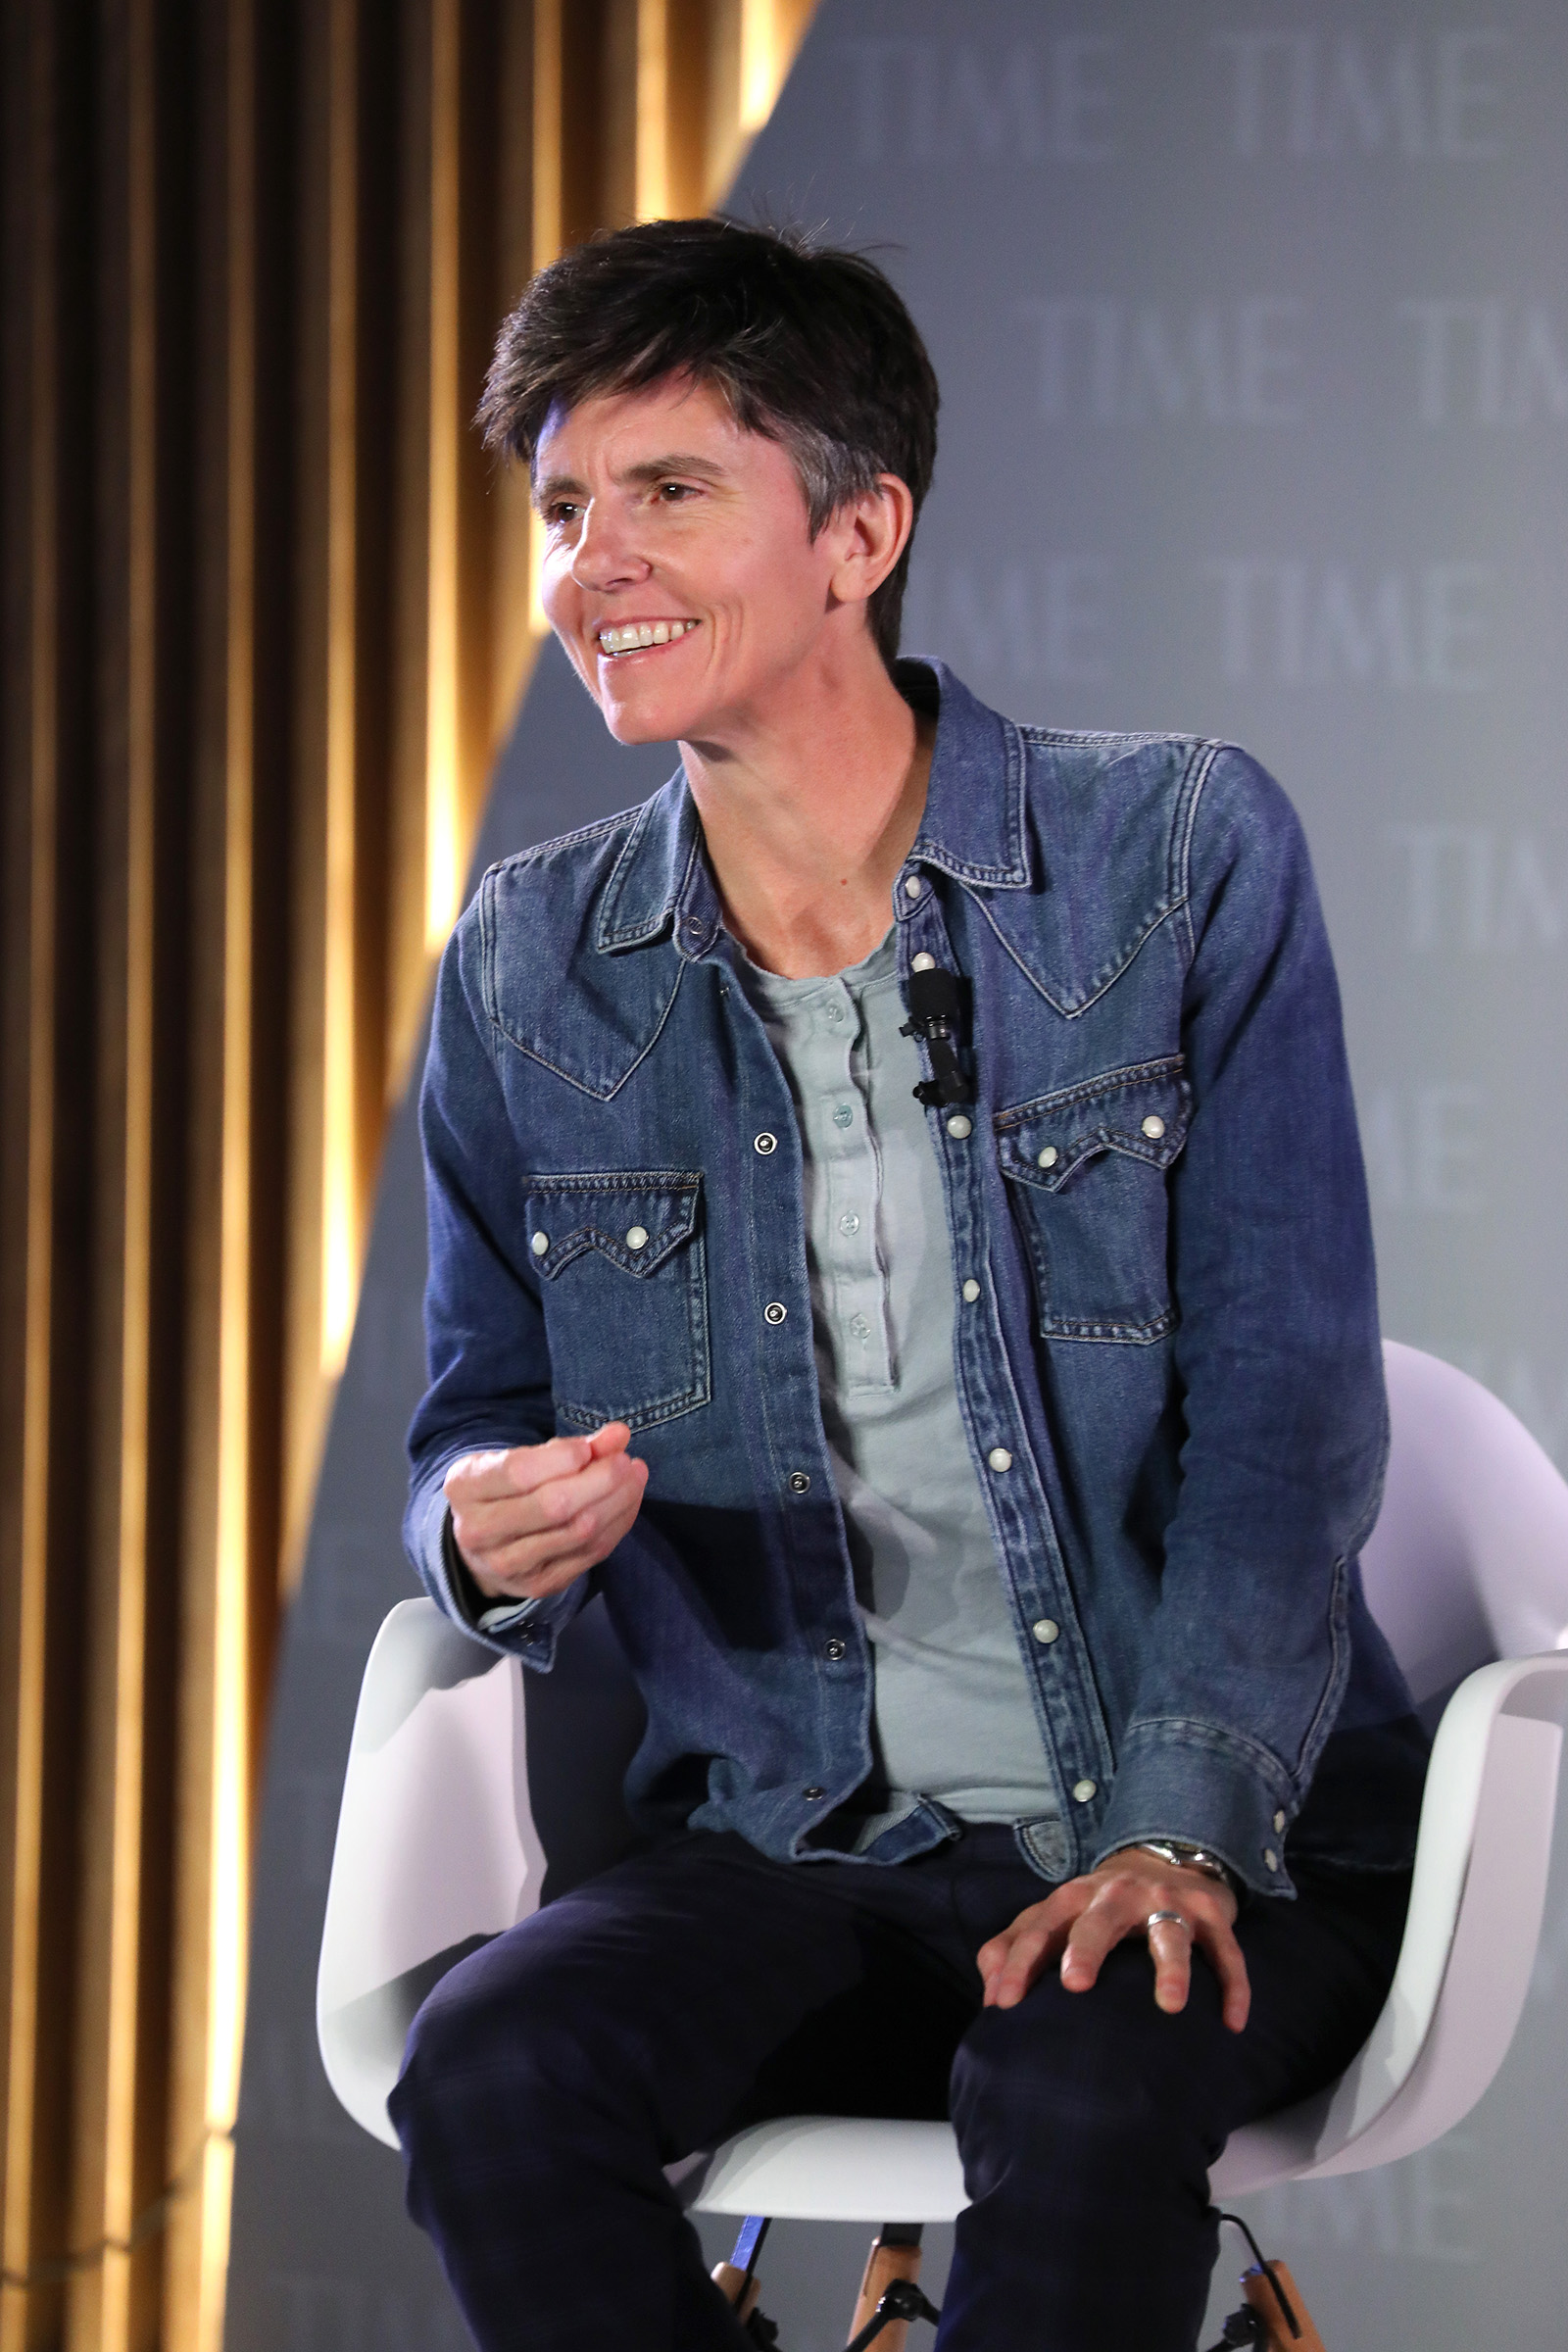 Comedian Tig Notaro speaks onstage during the TIME 100 Health Summit at Pier 17 in New York City on Oct. 17, 2019. (Brian Ach—Getty Images for TIME 100 Health)